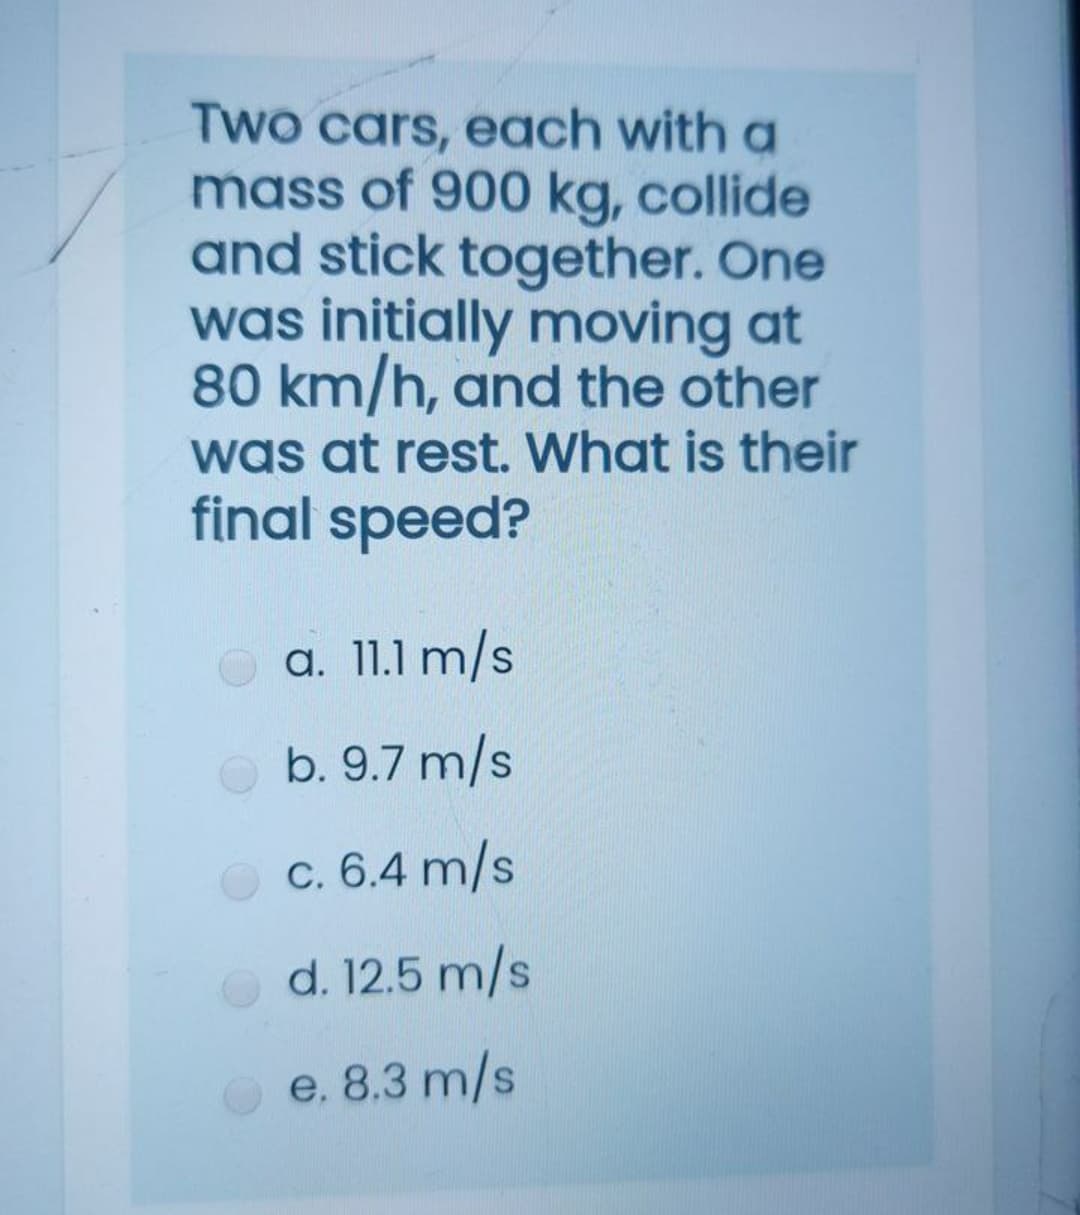 Two cars, each with a
mass of 900 kg, collide
and stick together. One
was initially moving at
80 km/h, and the other
was at rest. What is their
final speed?
a. 11.1 m/s
b. 9.7 m/s
c. 6.4 m/s
d. 12.5 m/s
e. 8.3 m/s
